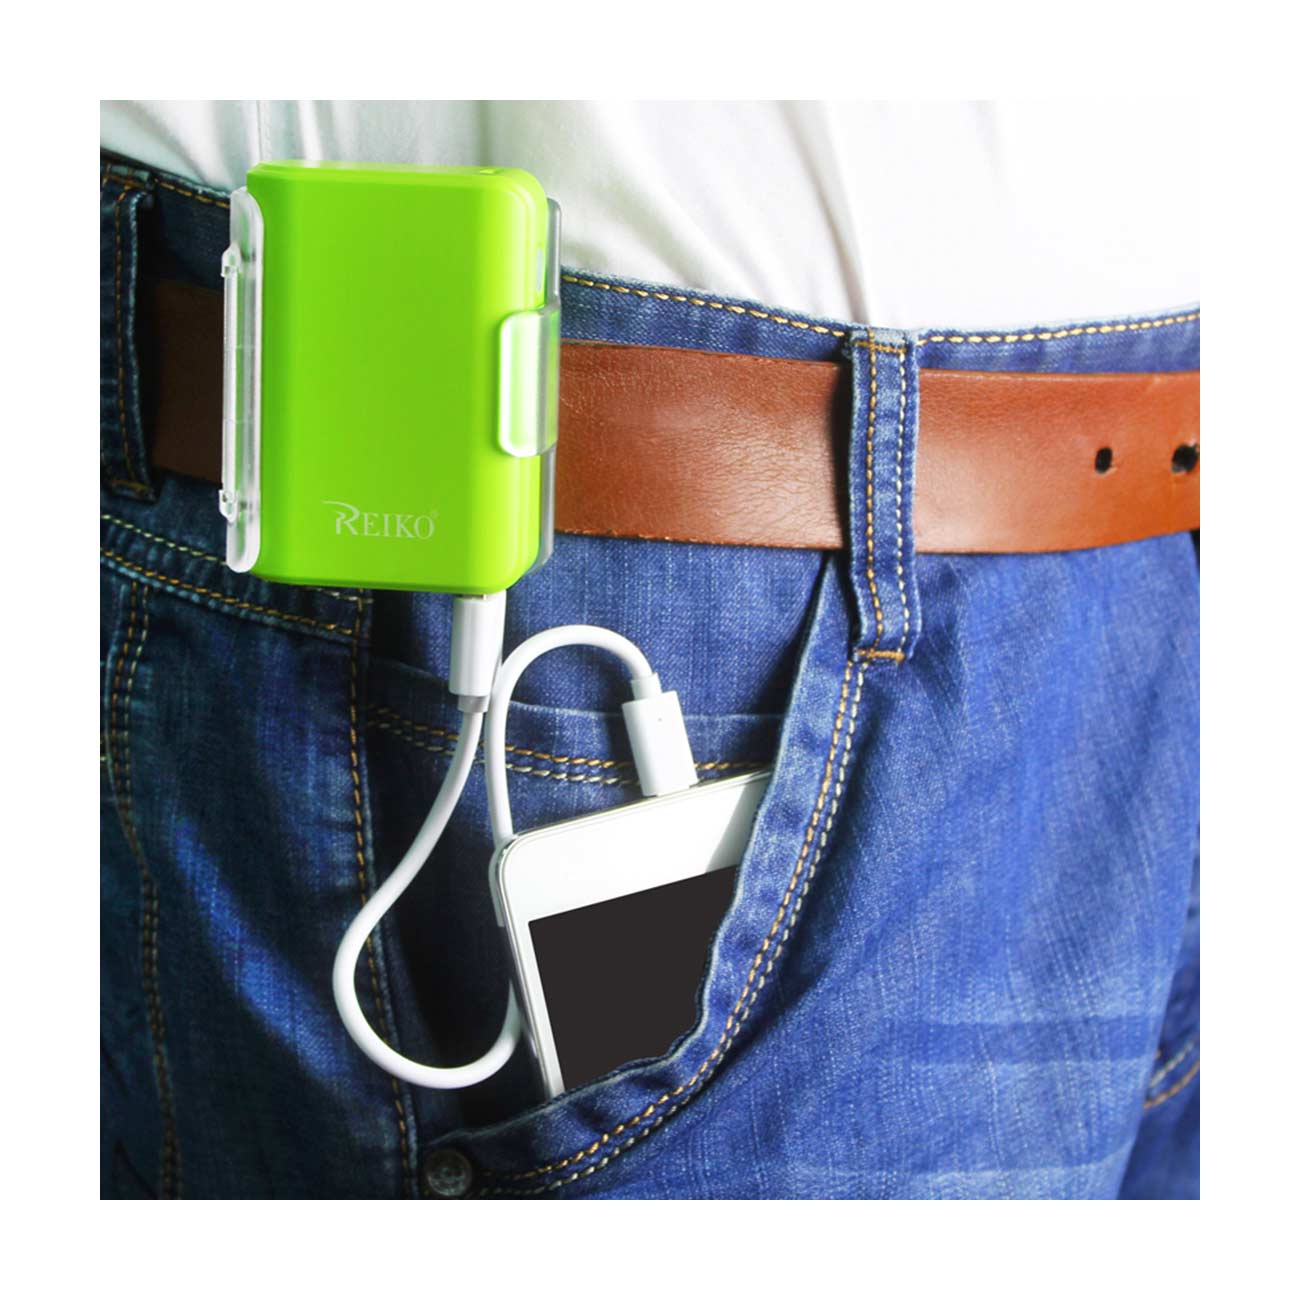 Power Bank Universal With Cable 4000Mah Green Color